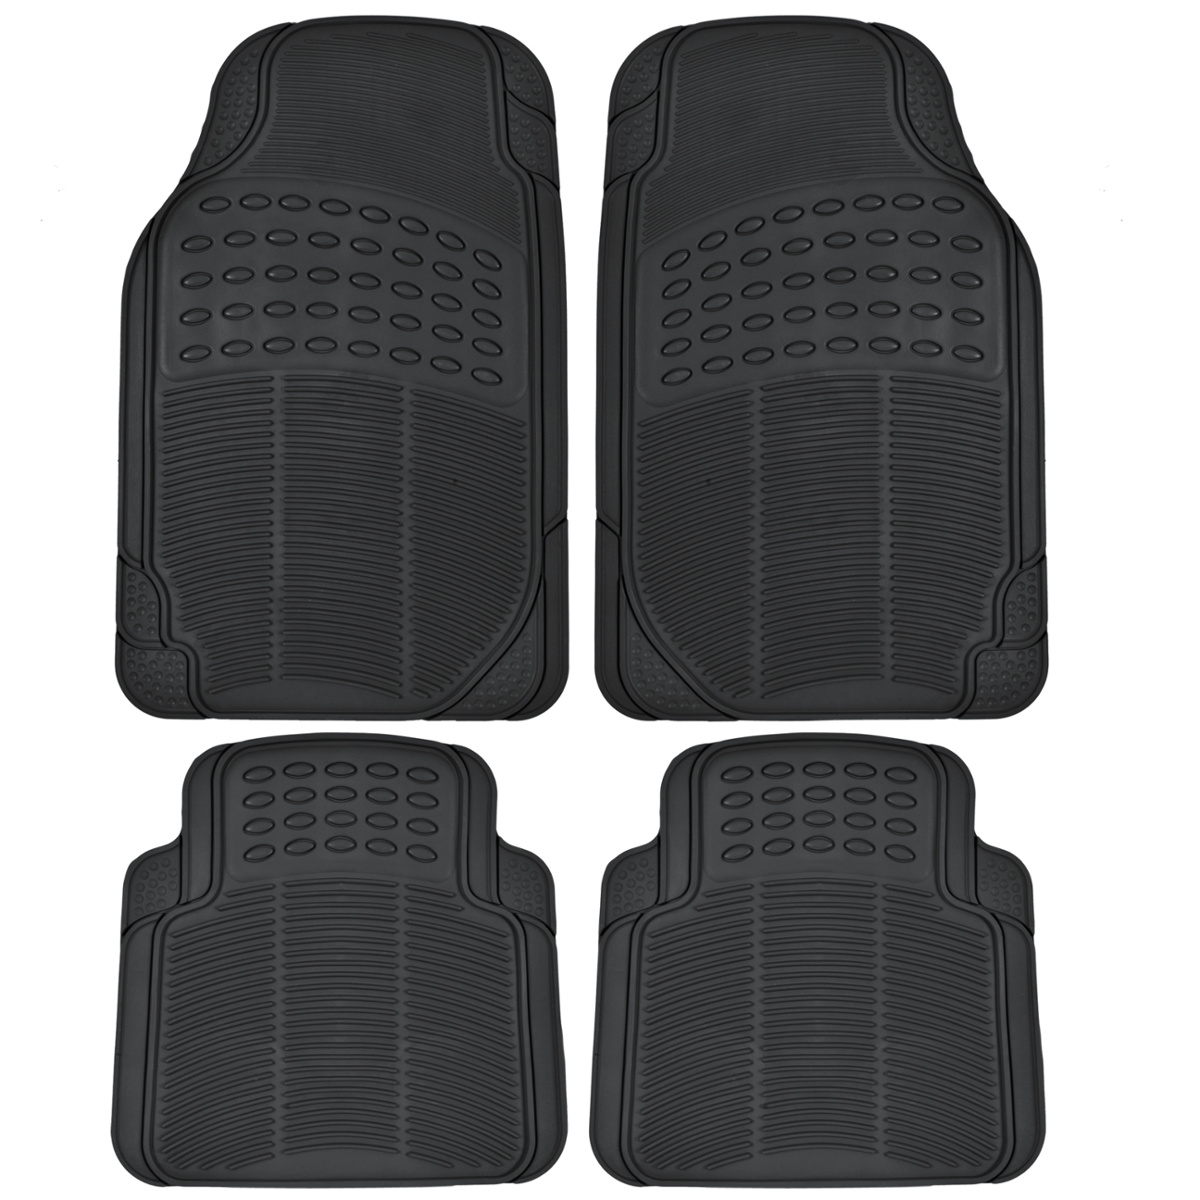 BDK All Weather Rubber Floor Mats for Car SUV & Truck - 4 Pieces Set (Front & Rear), Trimmable, Heavy Duty Protection (Black) - image 1 of 4